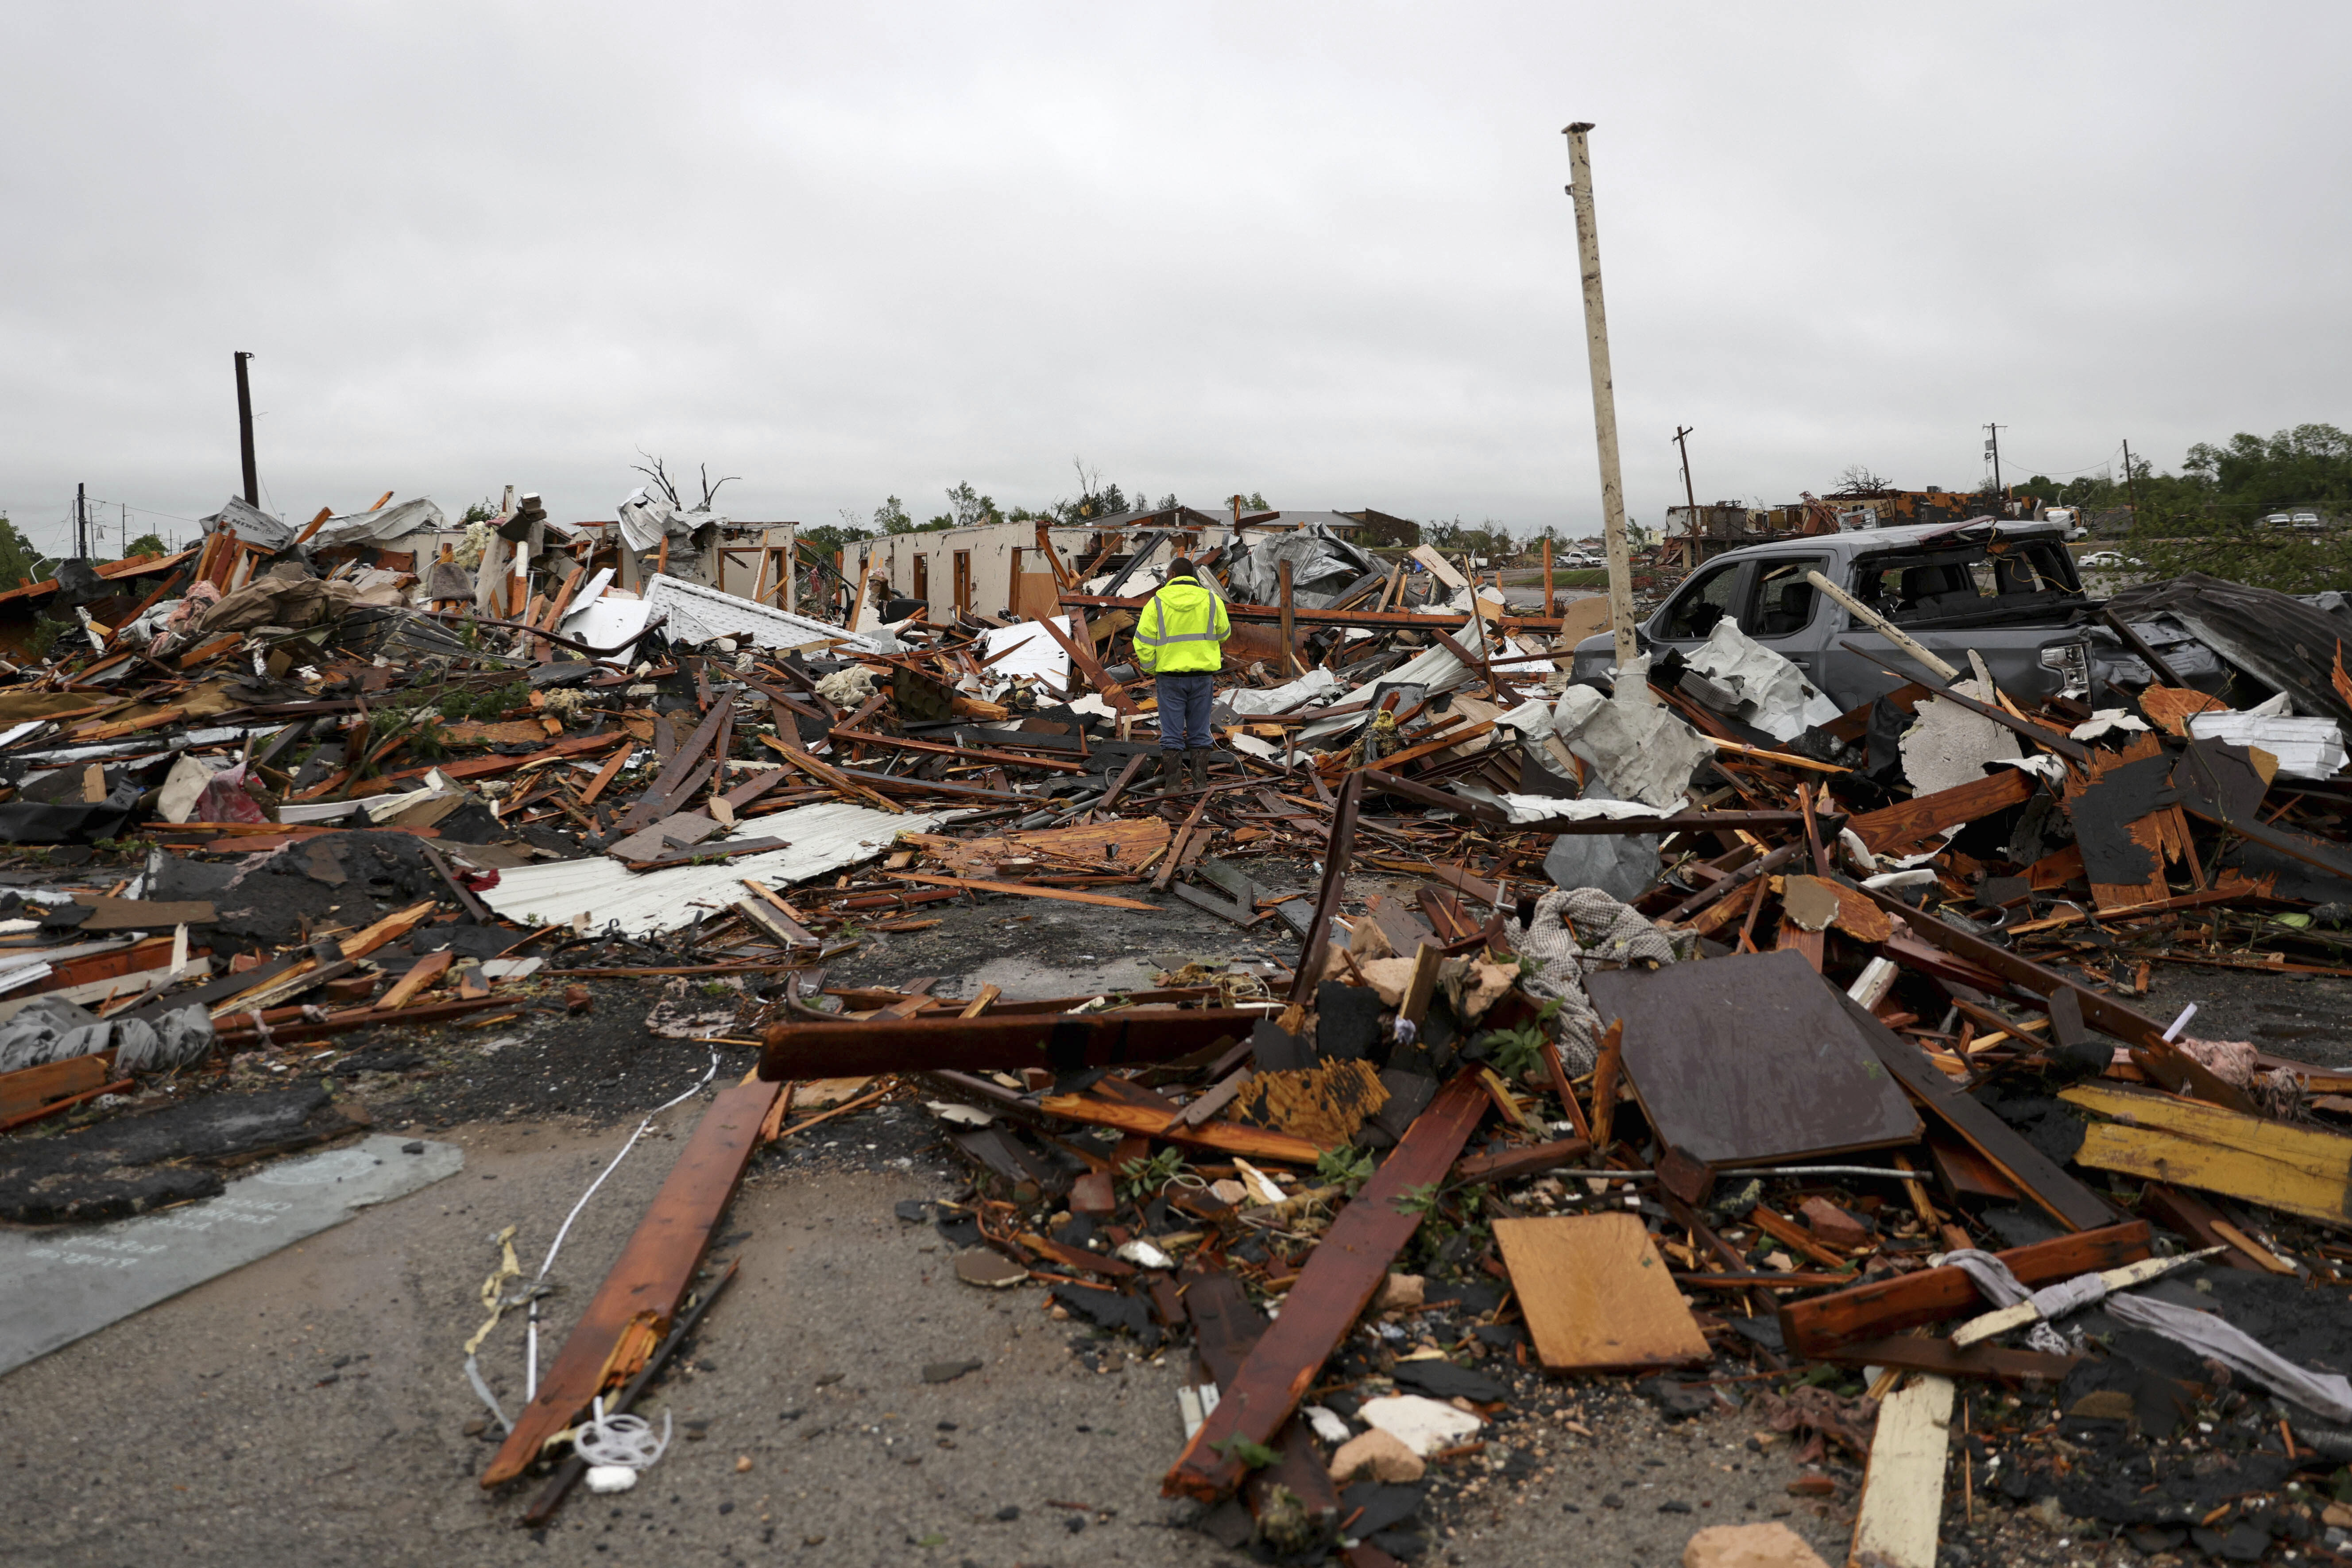 Tornadoes kills at least 2 including 1 child in Ok